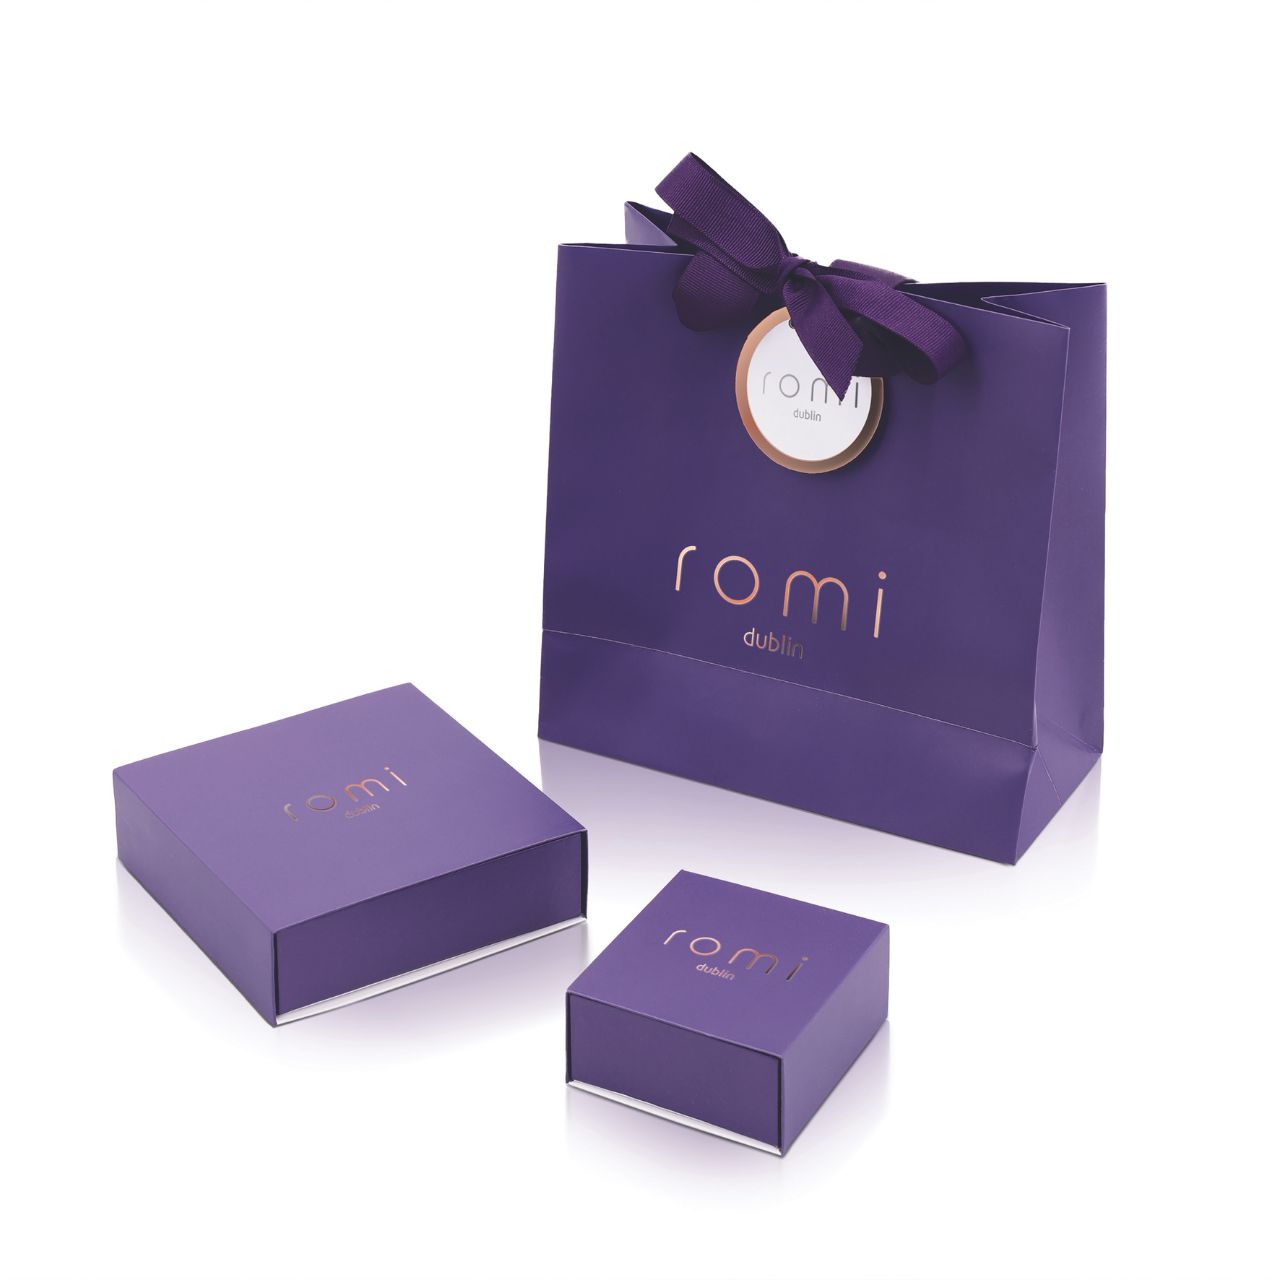 Romi Dublin Gold Net Bracelet  This easy-to-wear jewellery collection was inspired by daughter Romi who loves to style and accessorise. An outfit isn’t complete until the perfect pieces of jewellery and accessories have been selected to enhance it.